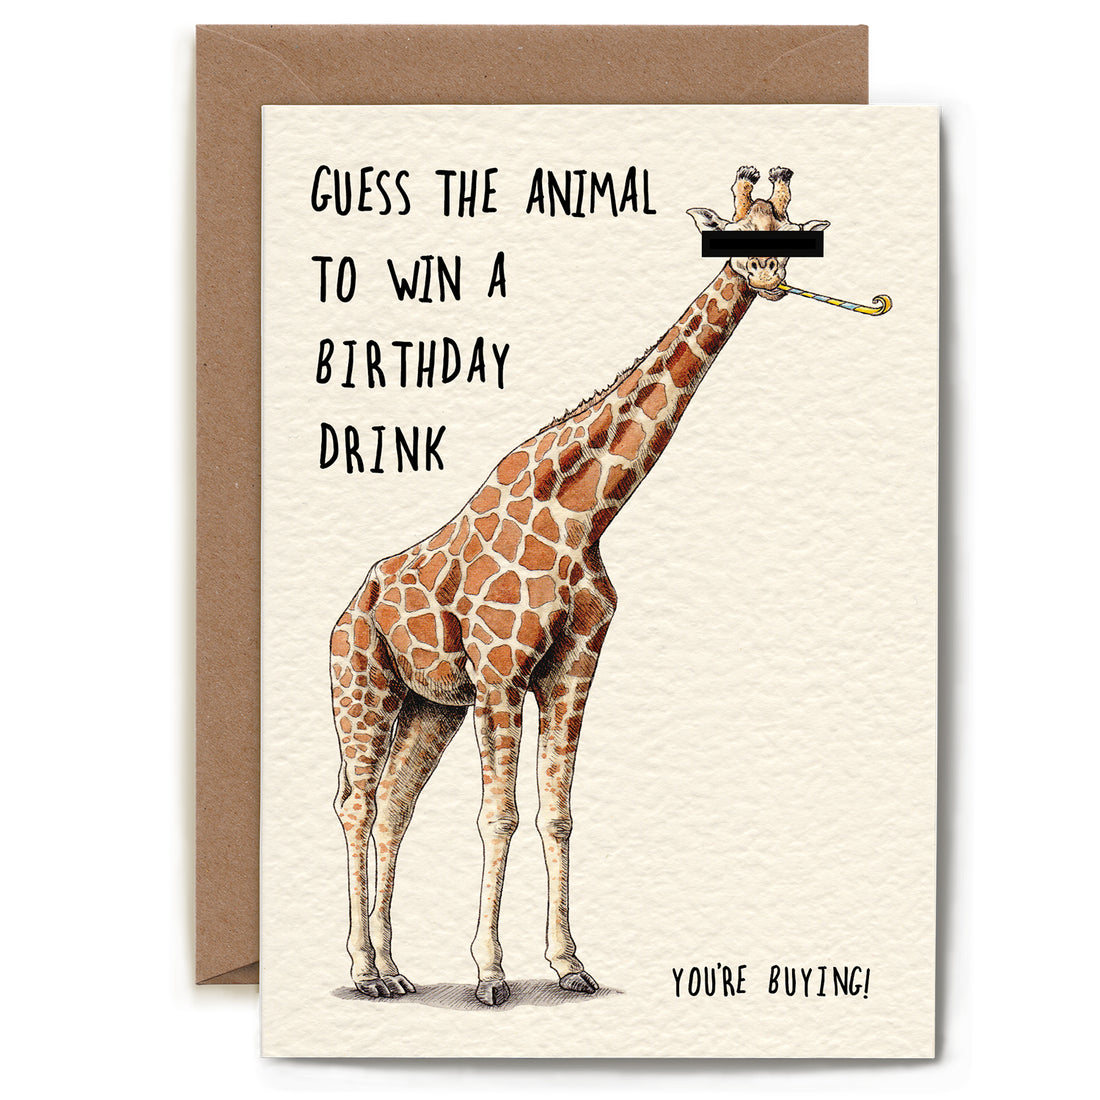 A Hester &amp; Cook Giraffe Birthday Card featuring an animal illustration of a giraffe enjoying a birthday drink in a proudly absurd manner.